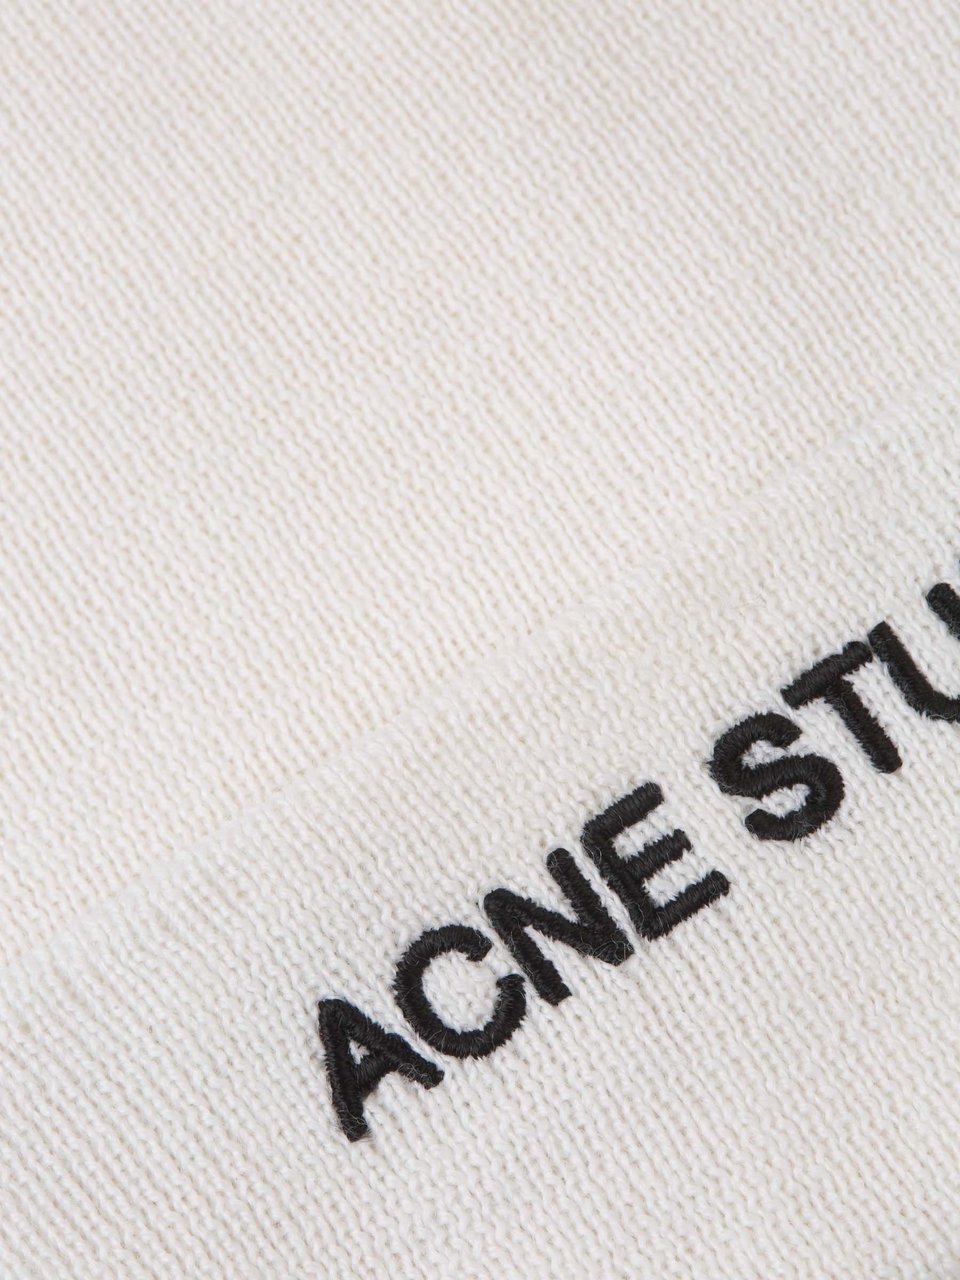 Acne Studios Embroidered Logo Beanie Divers